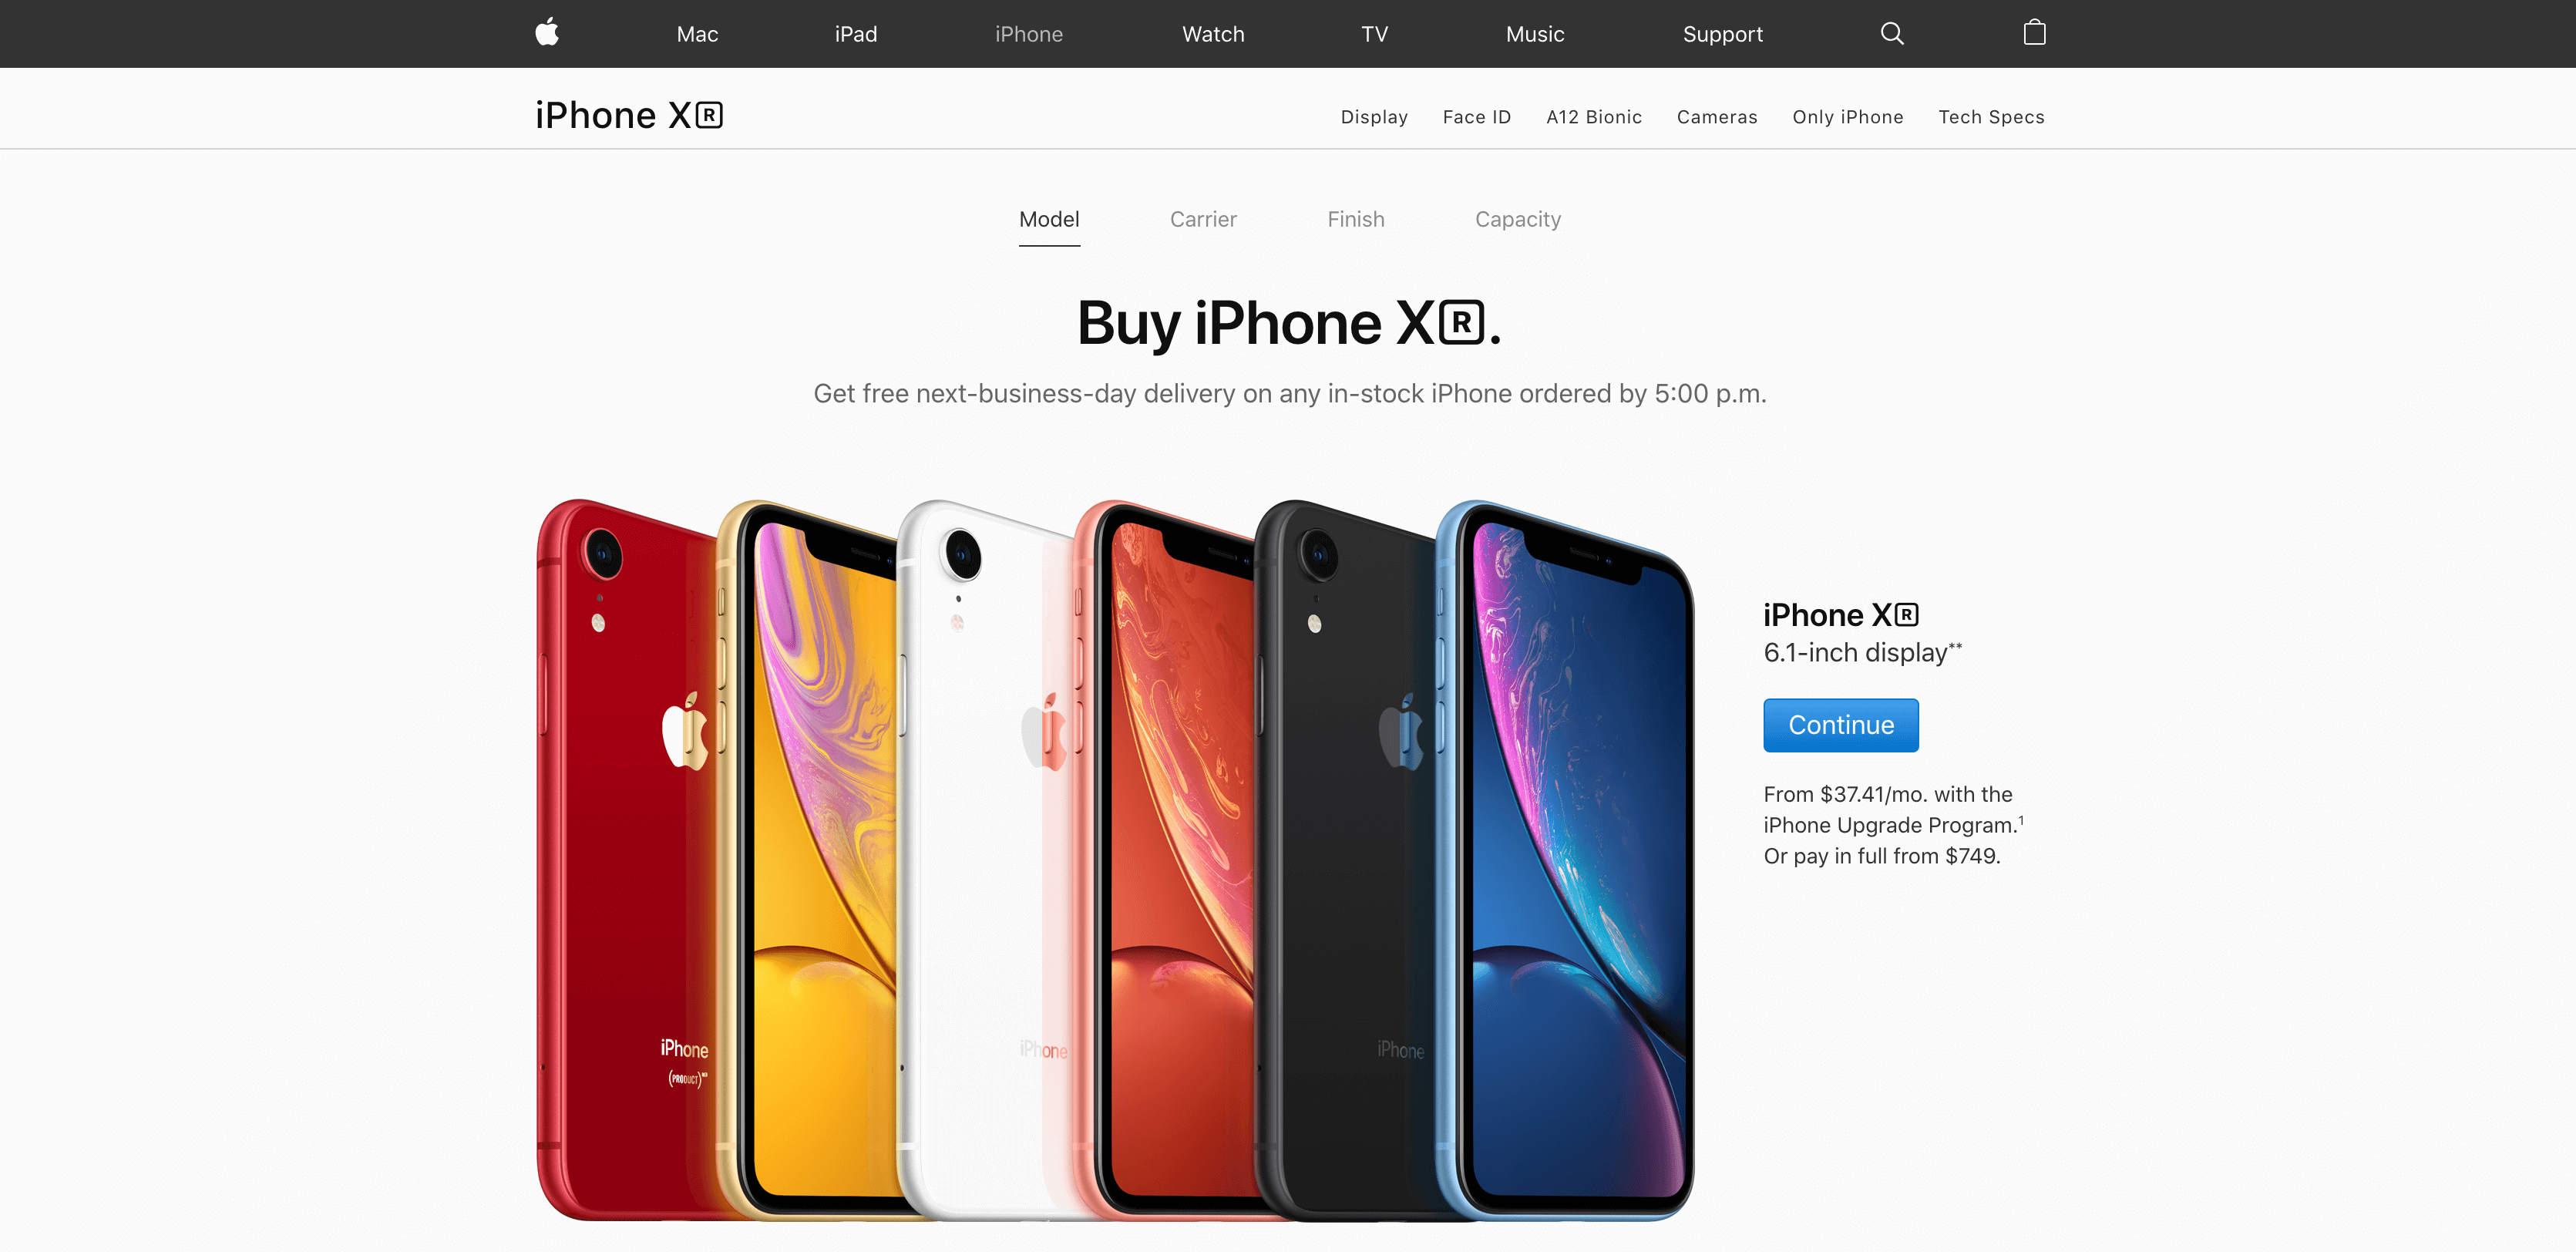 Apple website interface is very simple and easy to understand